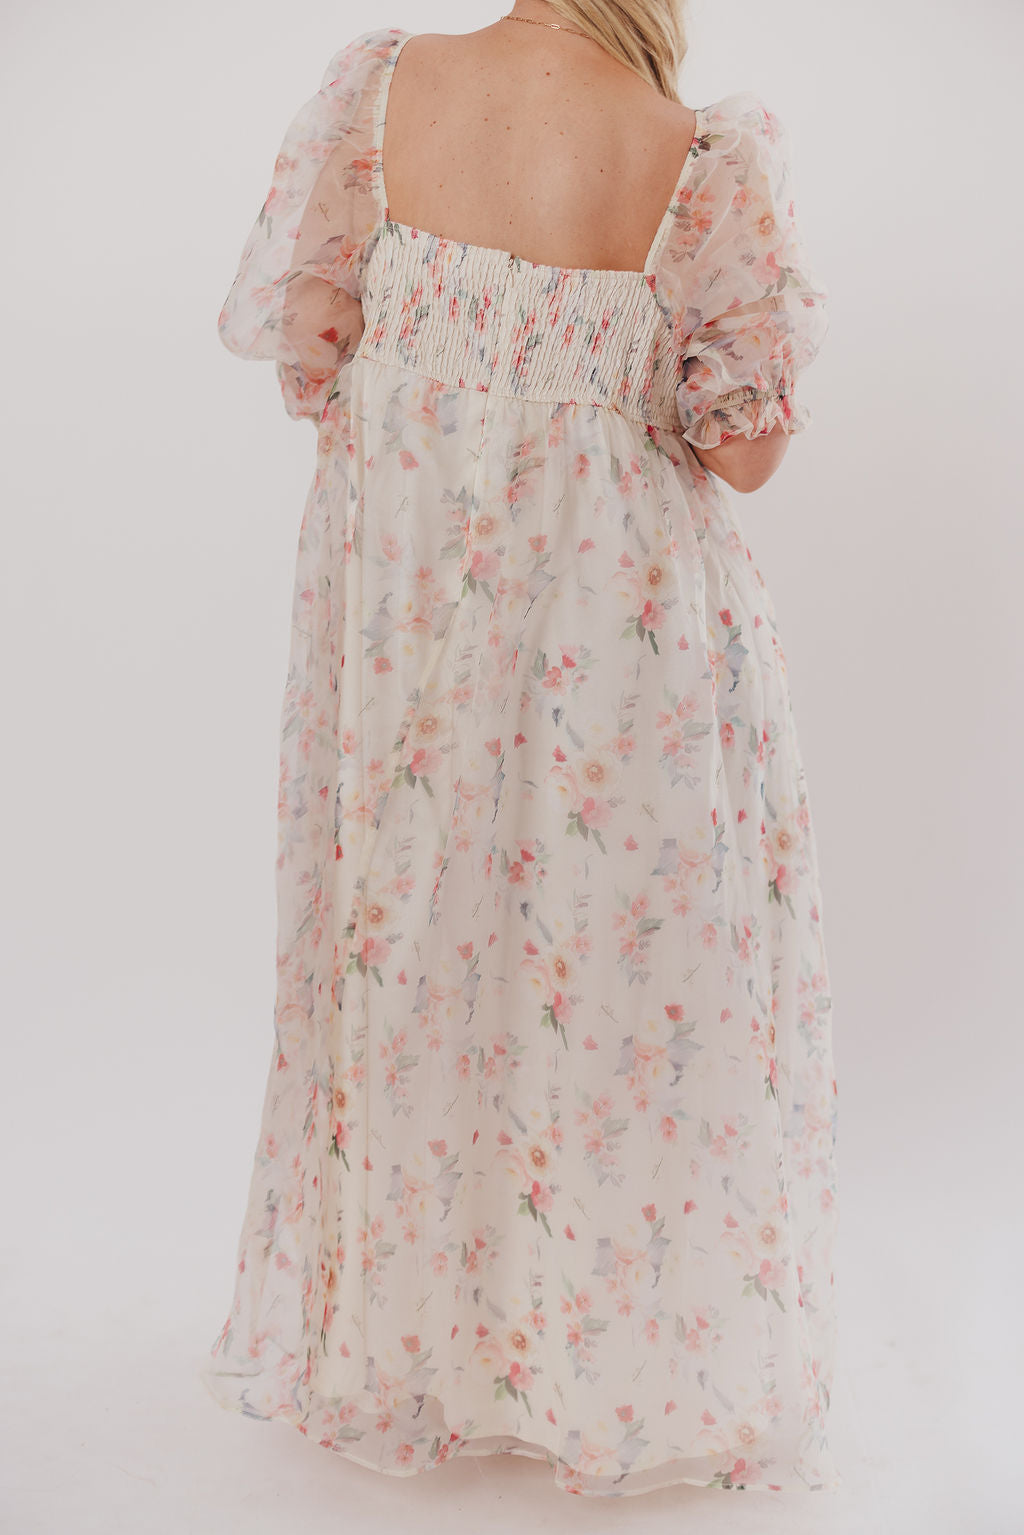 *New* Mona Maxi Dress with Smocking in Rosebud Floral - Bump Friendly & Inclusive Sizing (S-3XL)